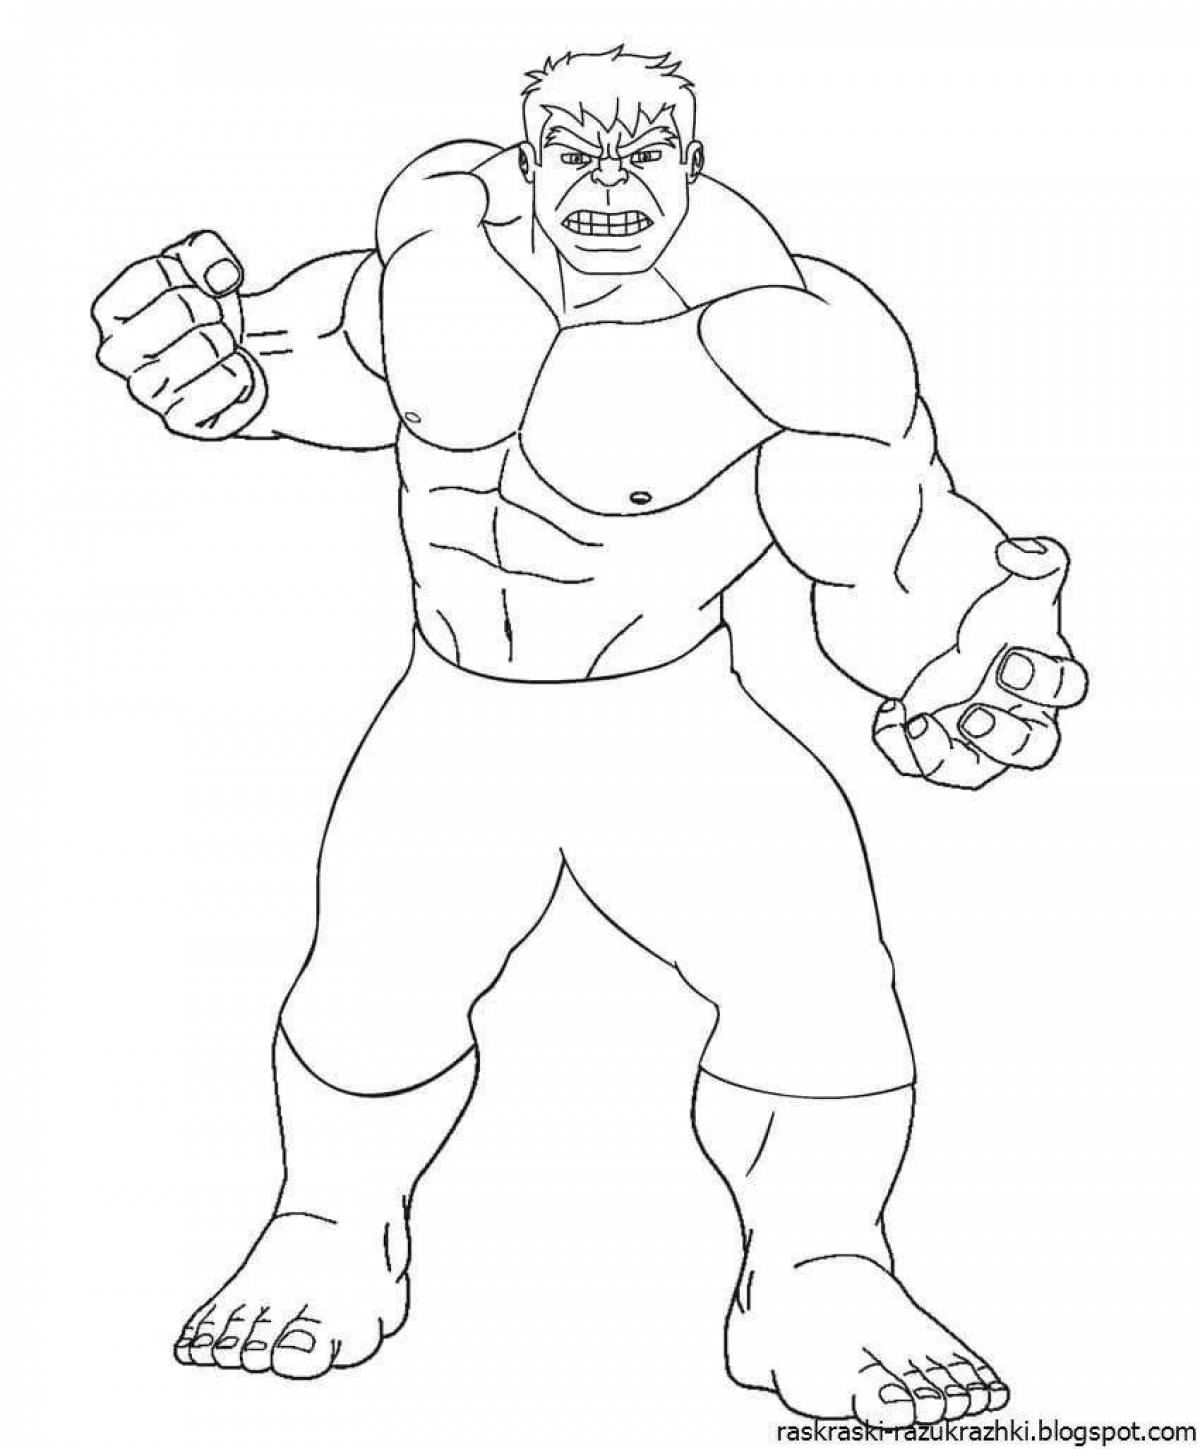 Coloring bright hulk for kids